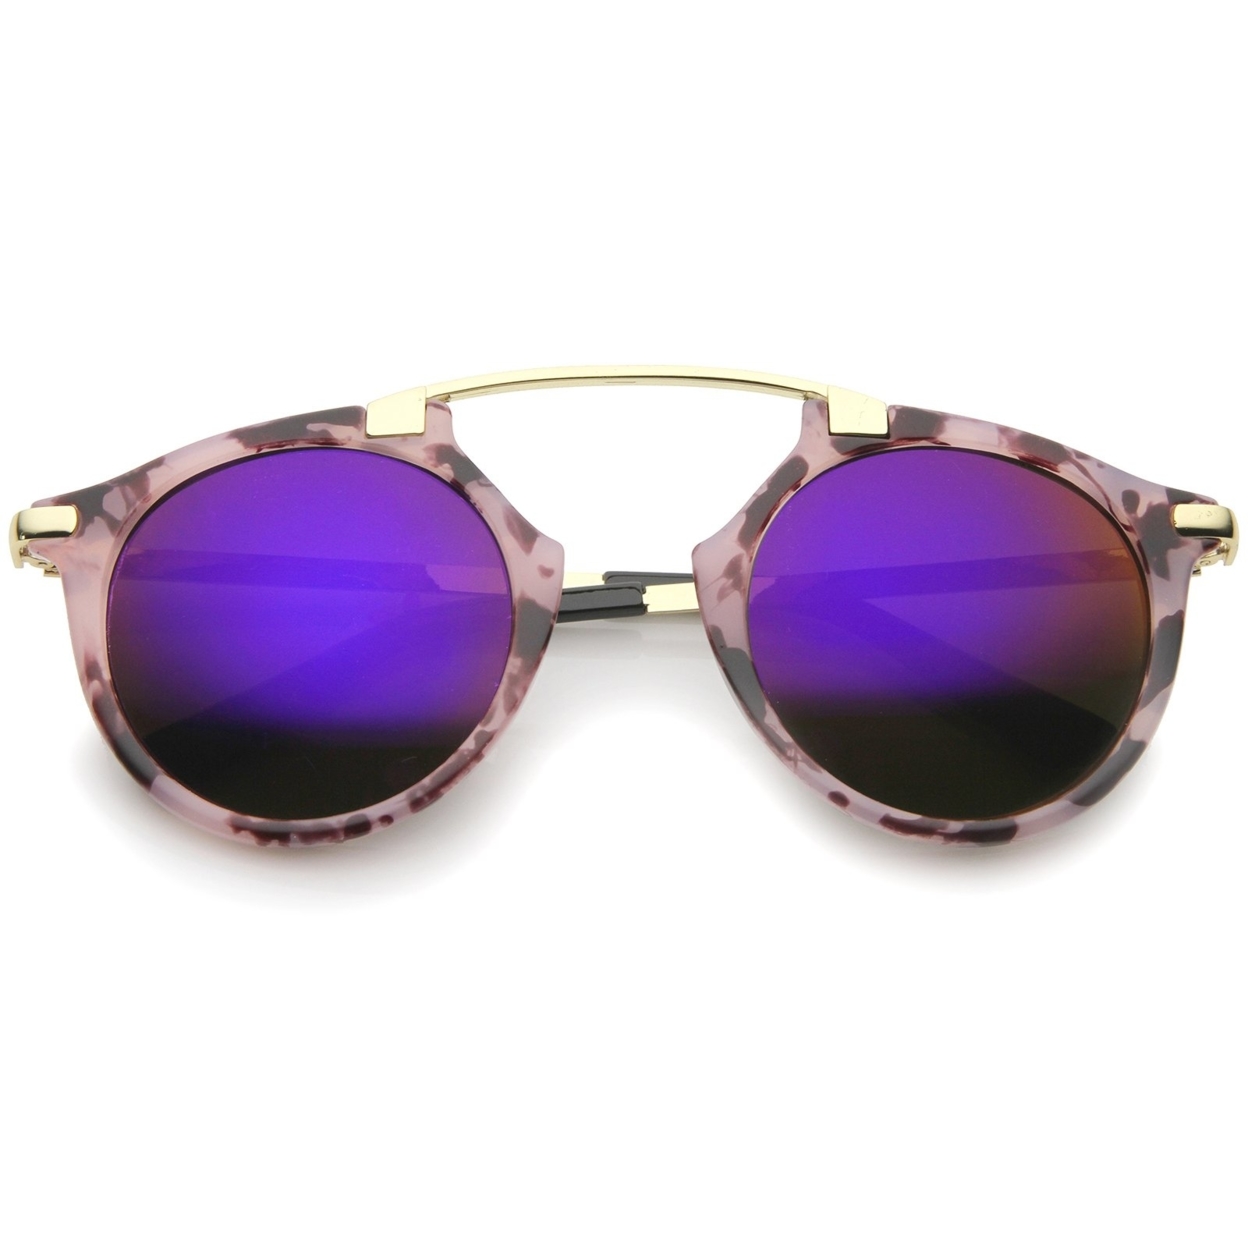 High Fashion Arched Marble Color Frame Color Mirror Pantos Aviator Sunglasses 48mm - Smoke-Gold / Yellow Mirror